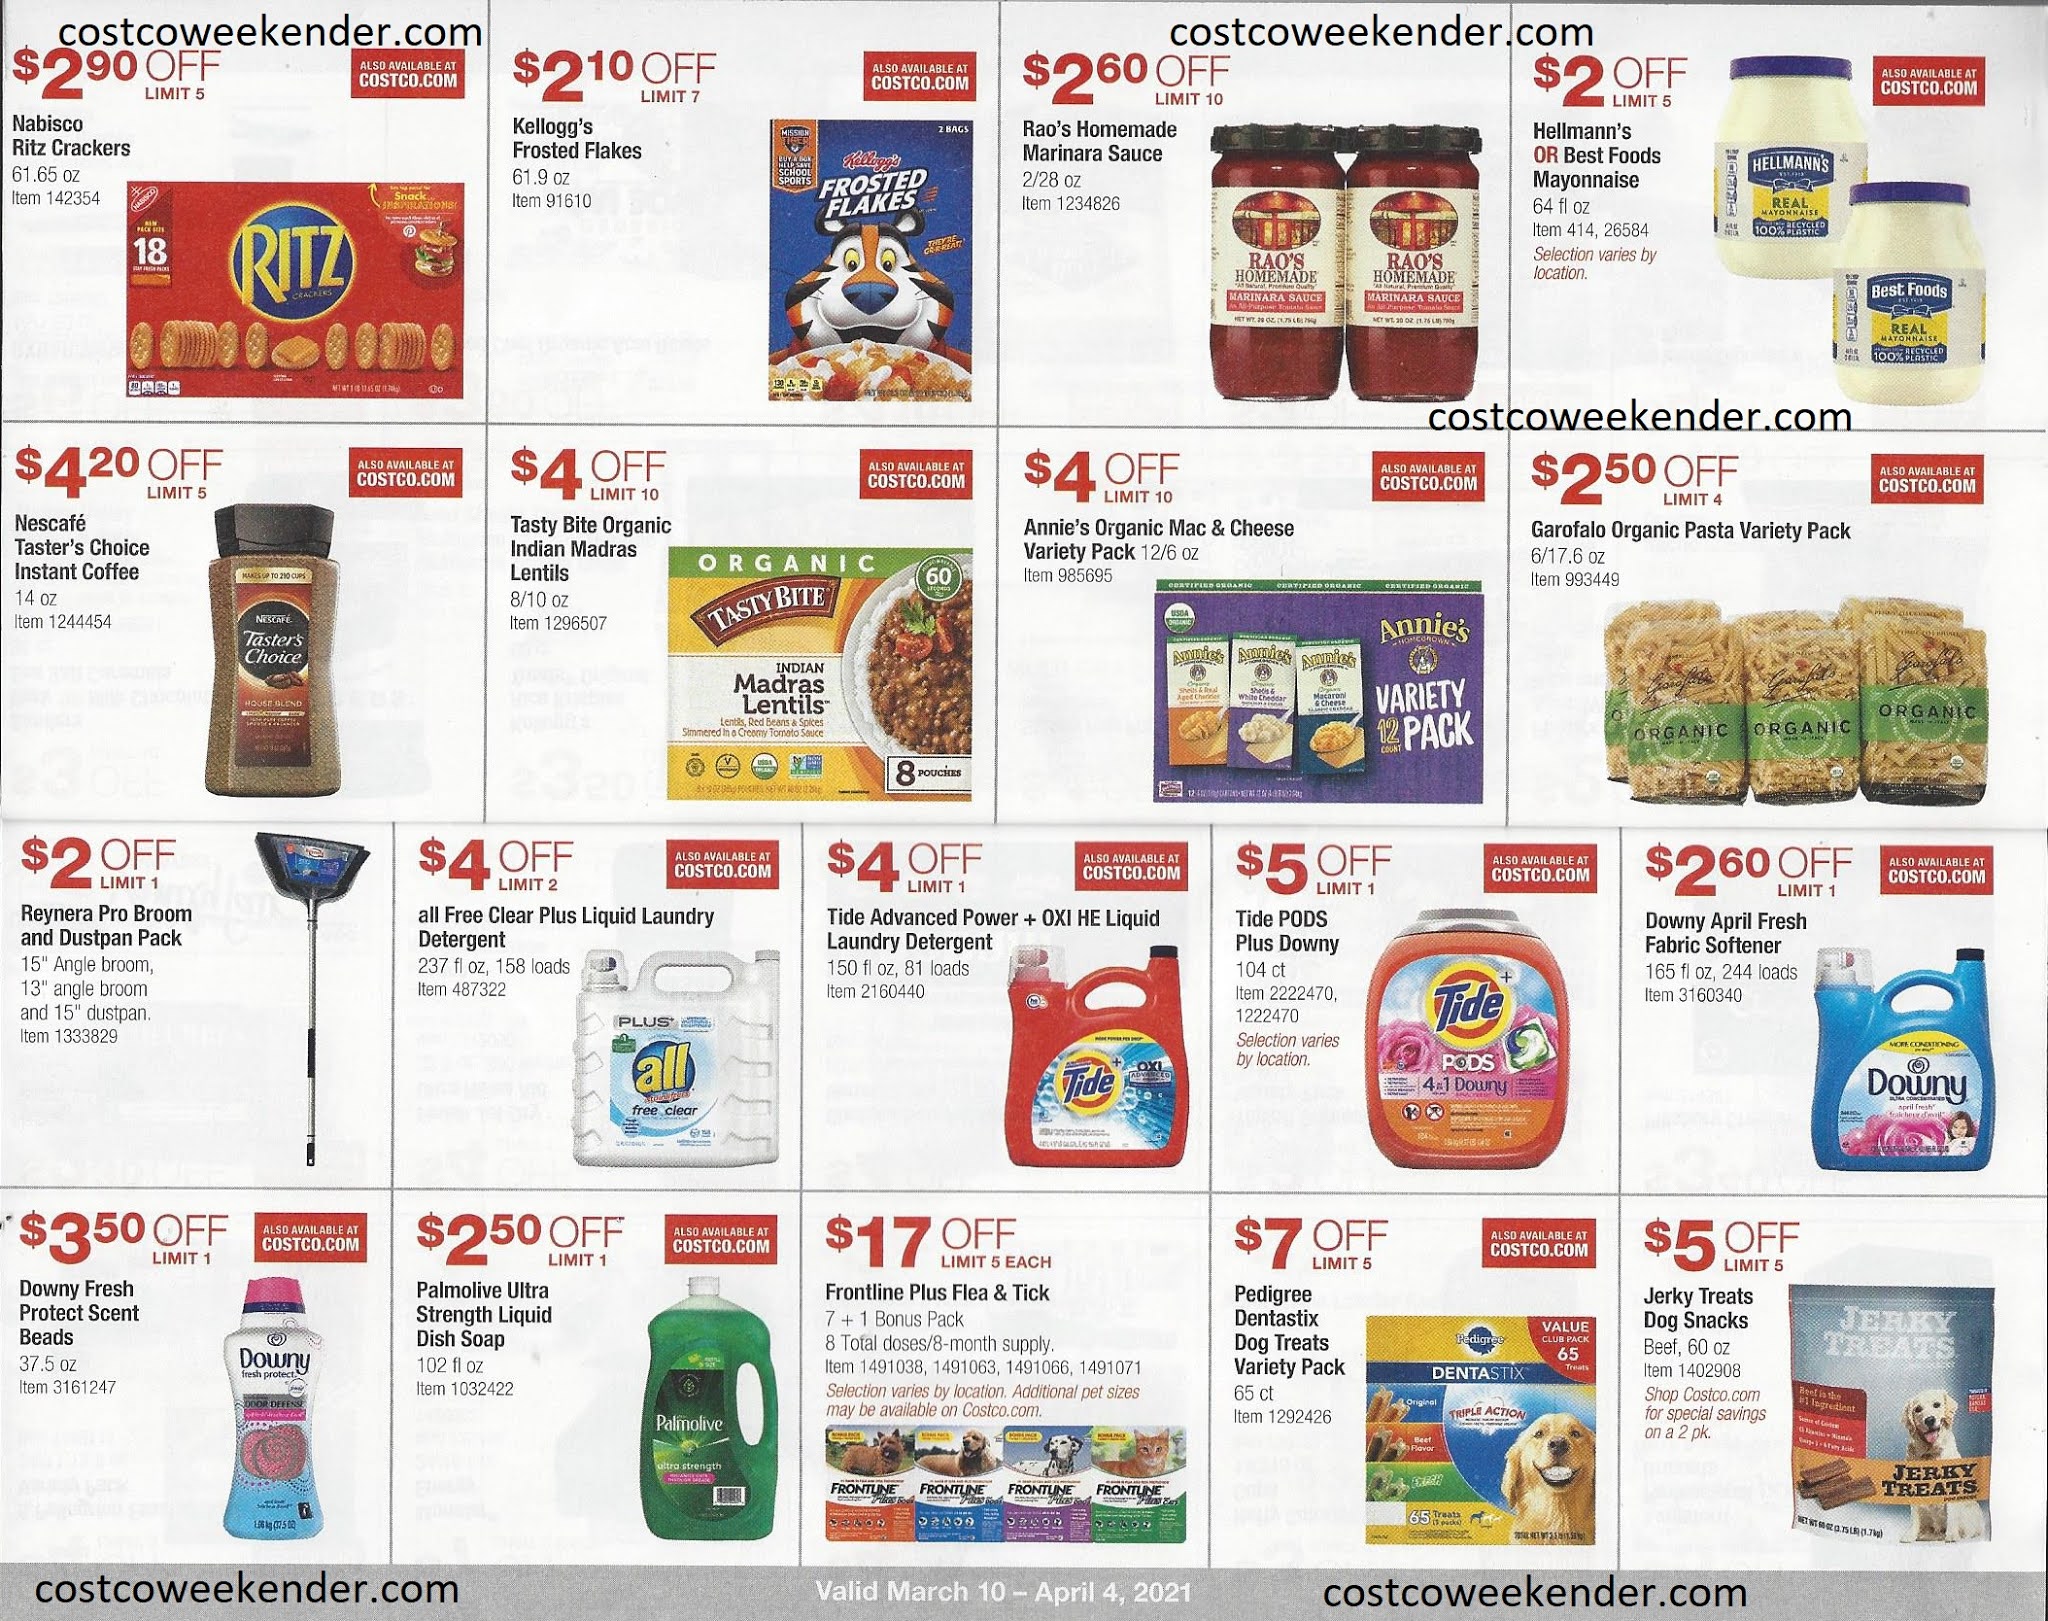 Costco June/July Coupon Book - wide 7